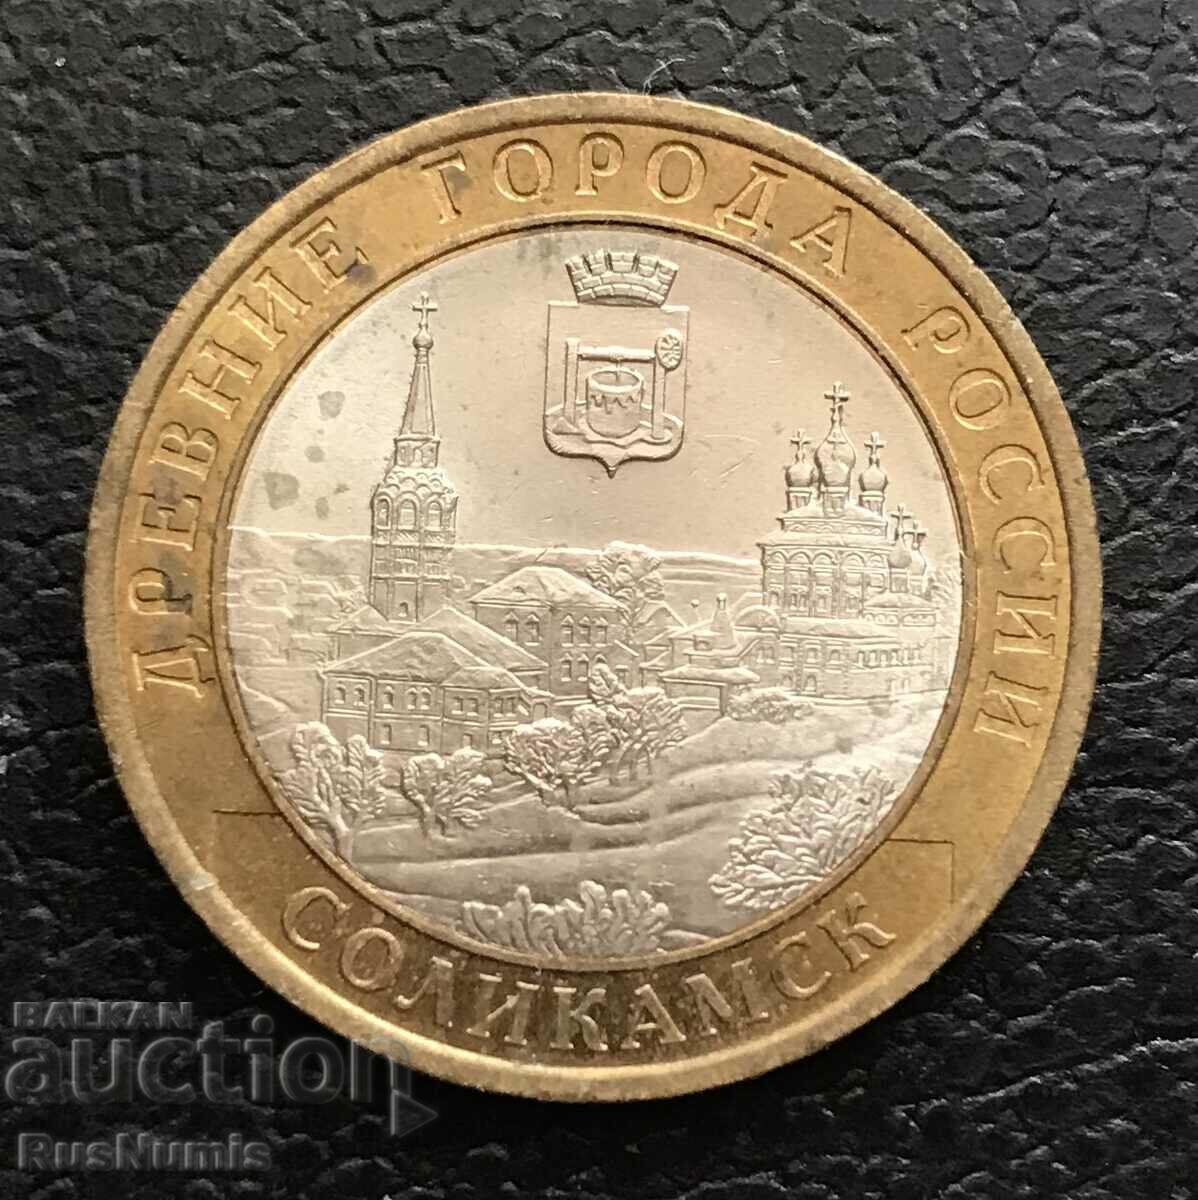 Russia. 10 rubles 2011 Solikamsk.